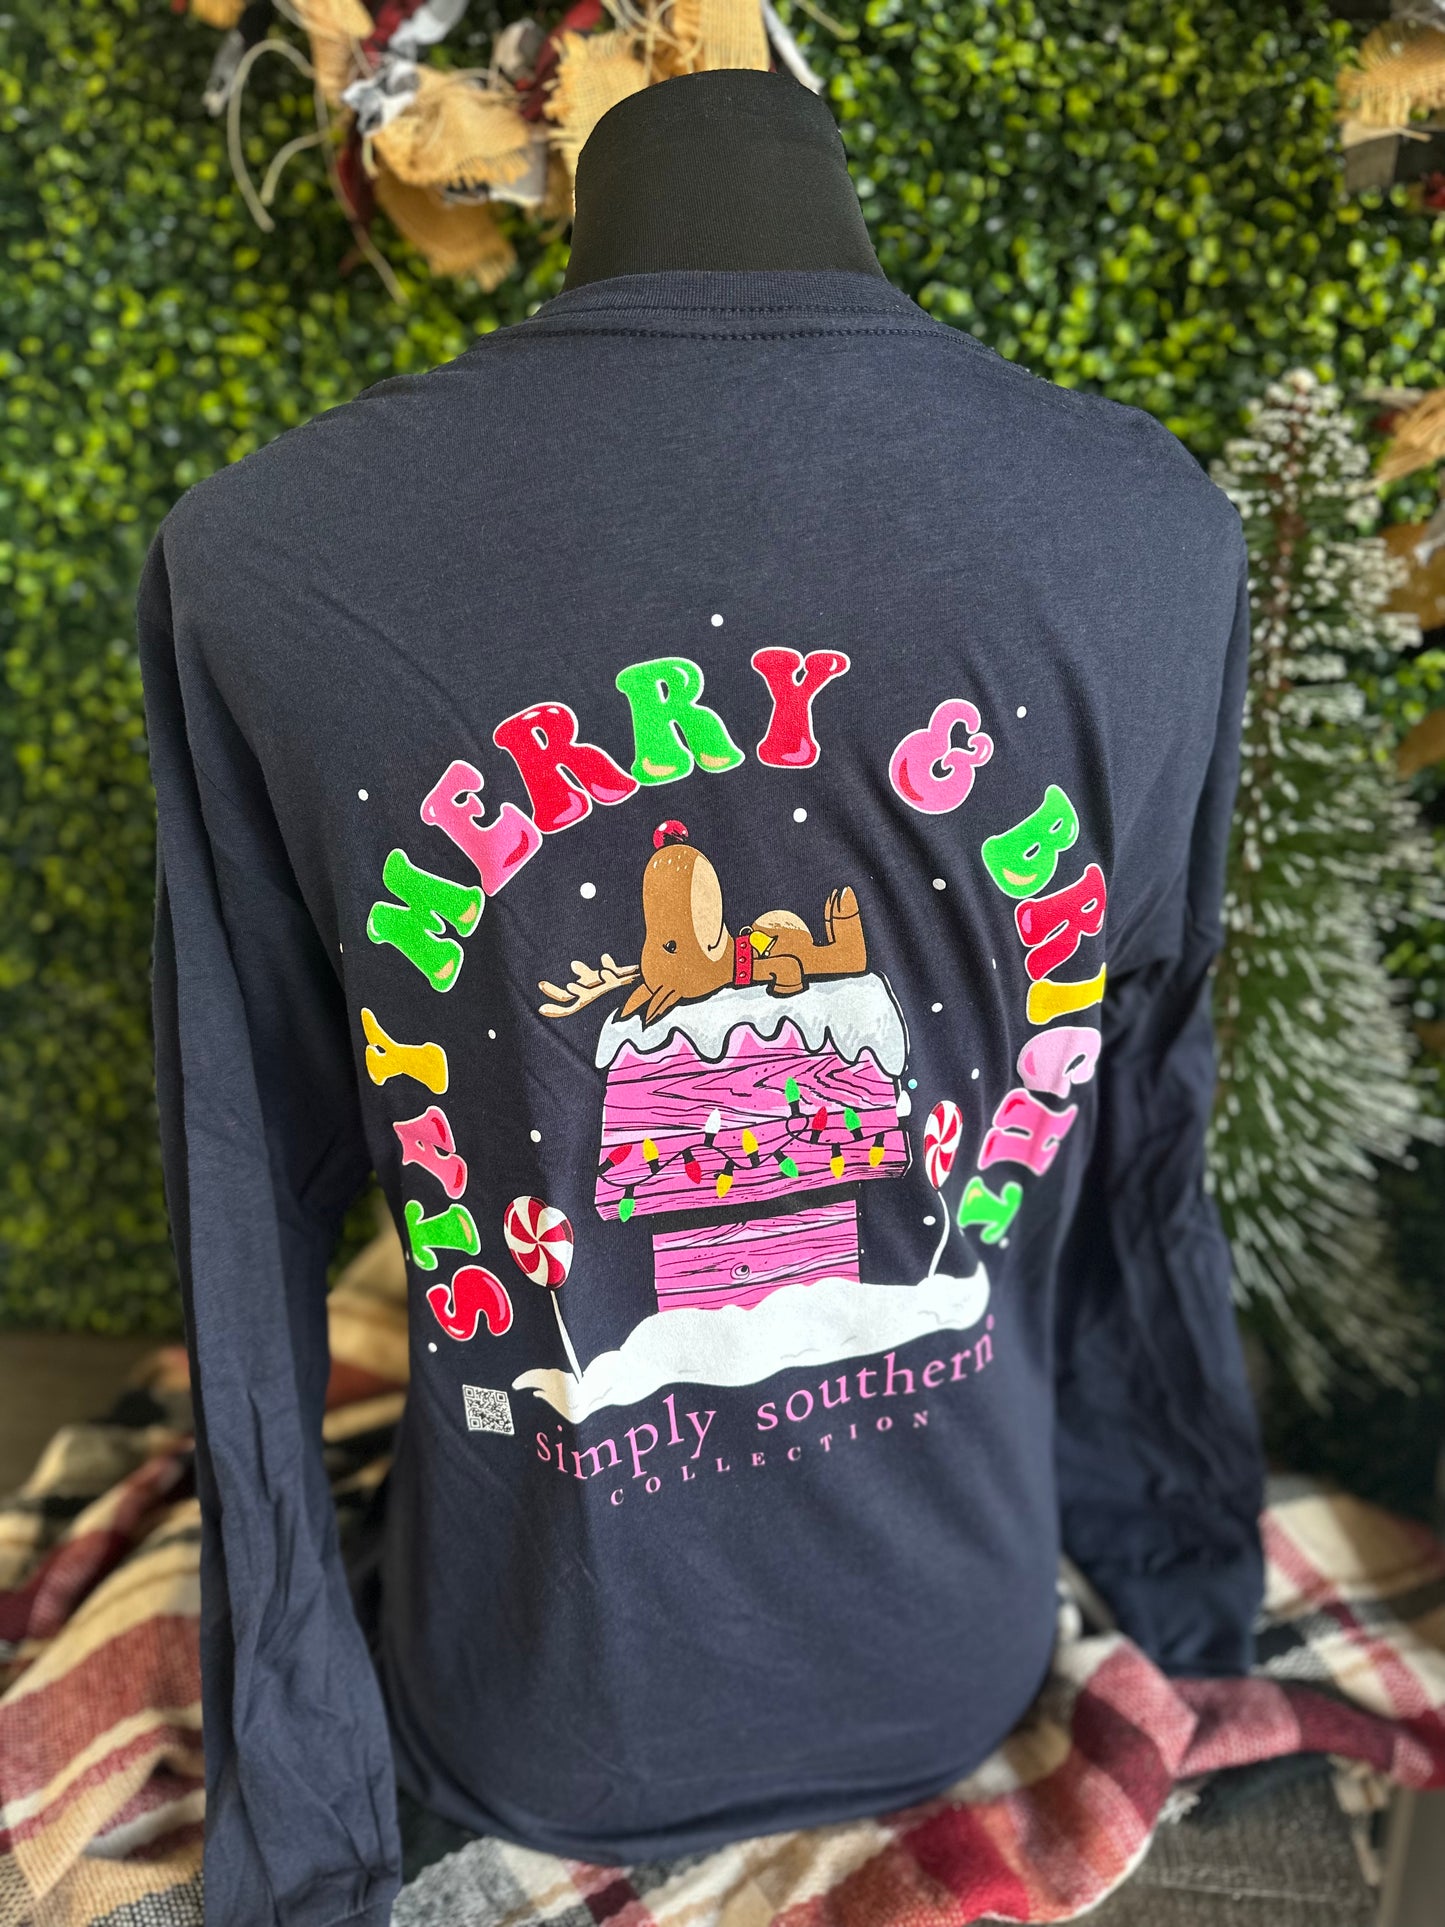 FINAL SALE - YOUTH - Simply Southern - Stay Merry & Bright Long Sleeve Tee